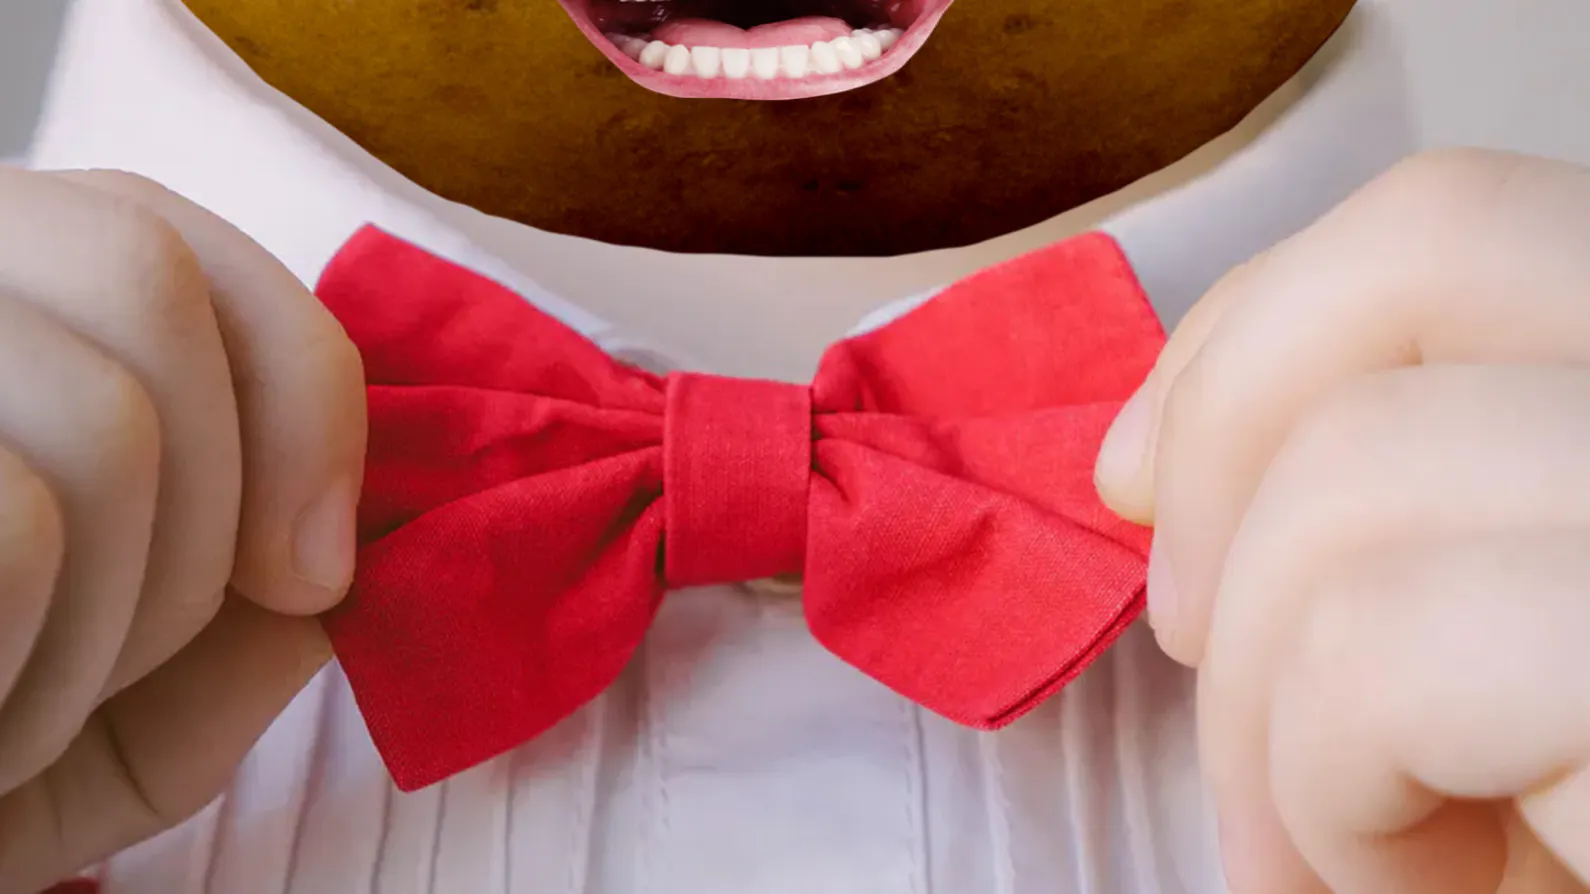 A potato putting on a snazzy bowtie